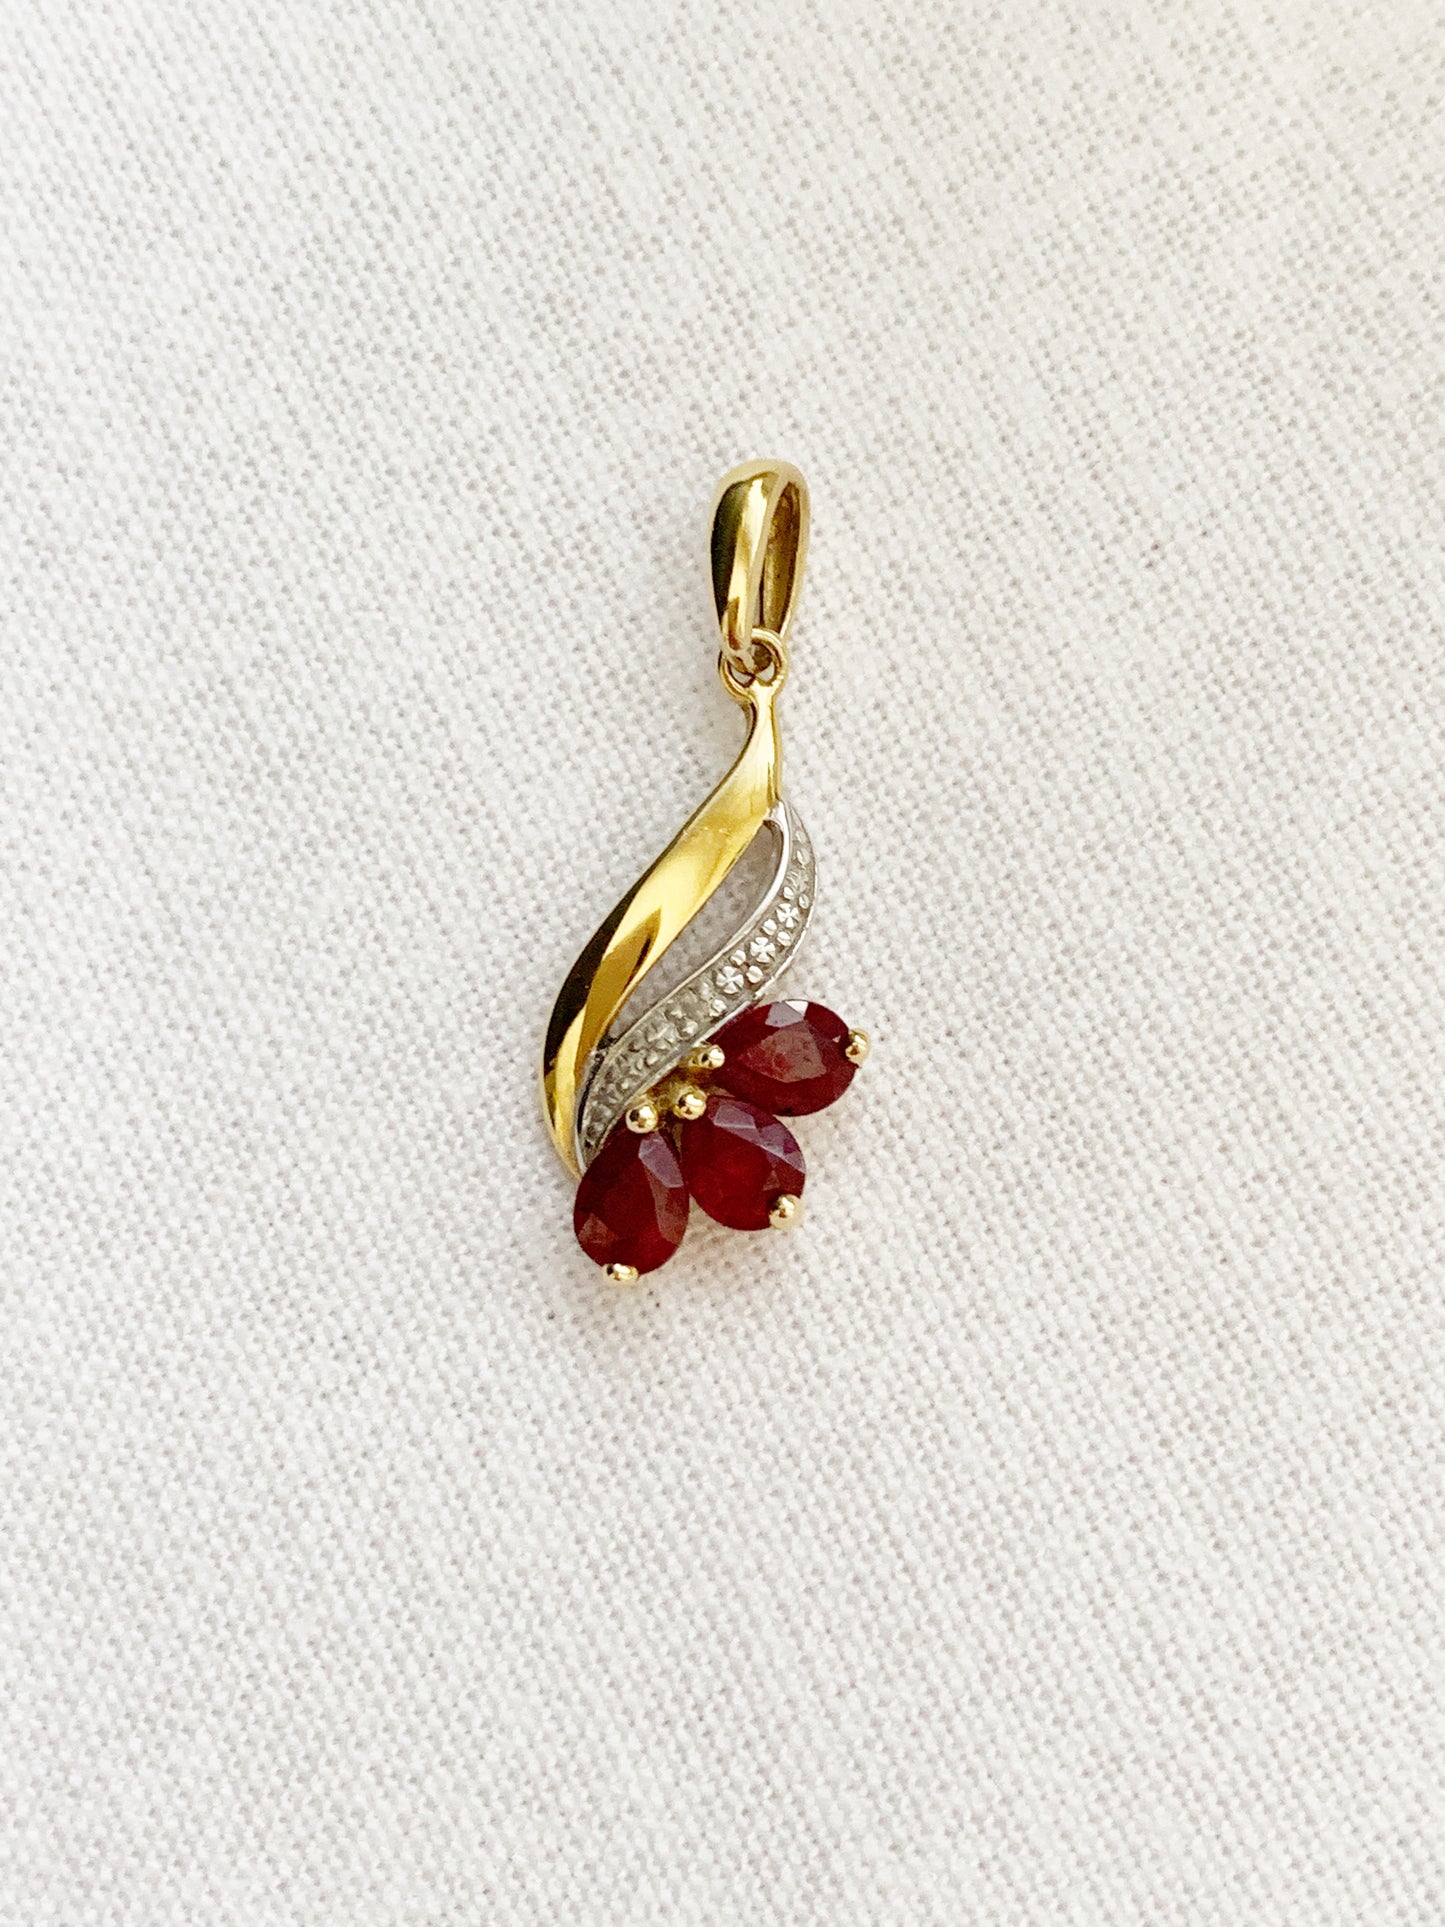 Vintage 9ct Gold Ruby and Diamond Pendant